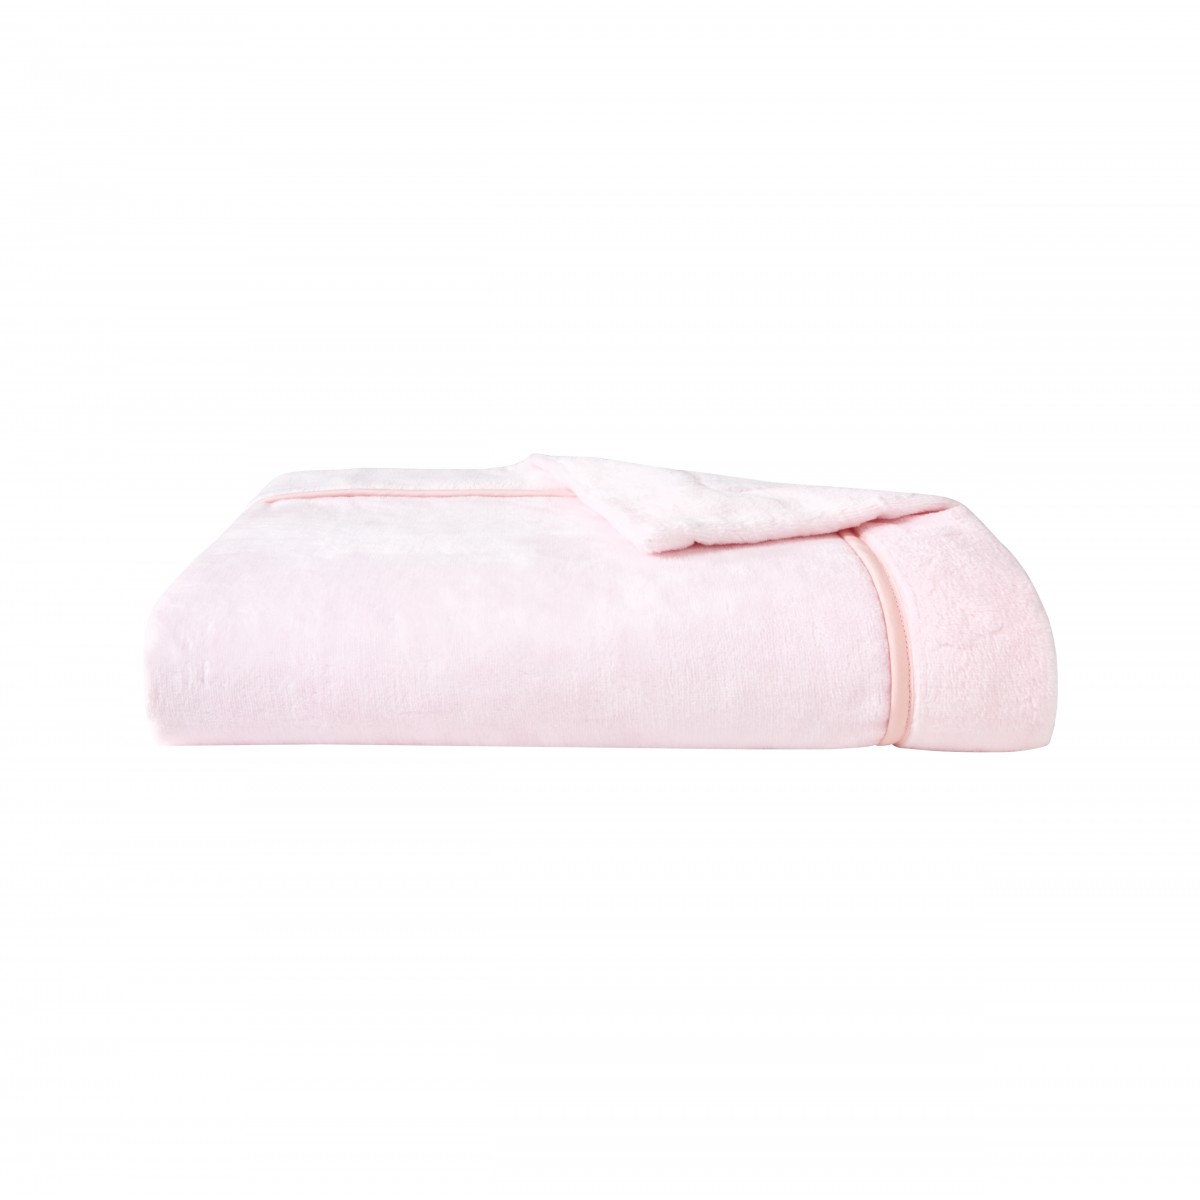 Yves Delorme Cotton Blanket - Luxury 綿毛布 - Yves Delorme